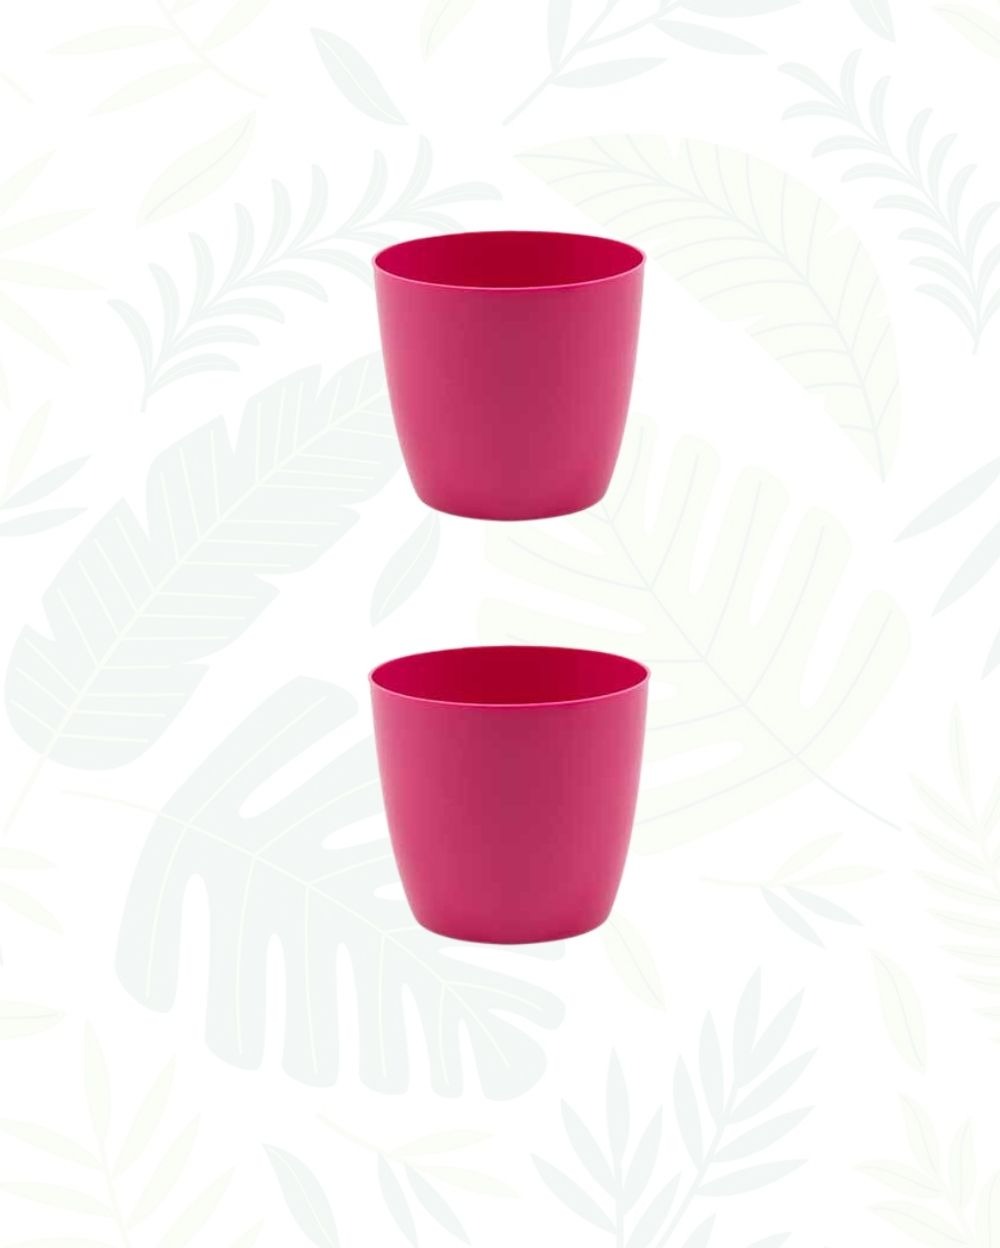 Set of 2 VALENCIA PLANTERS - 5.5 Inch, Pink